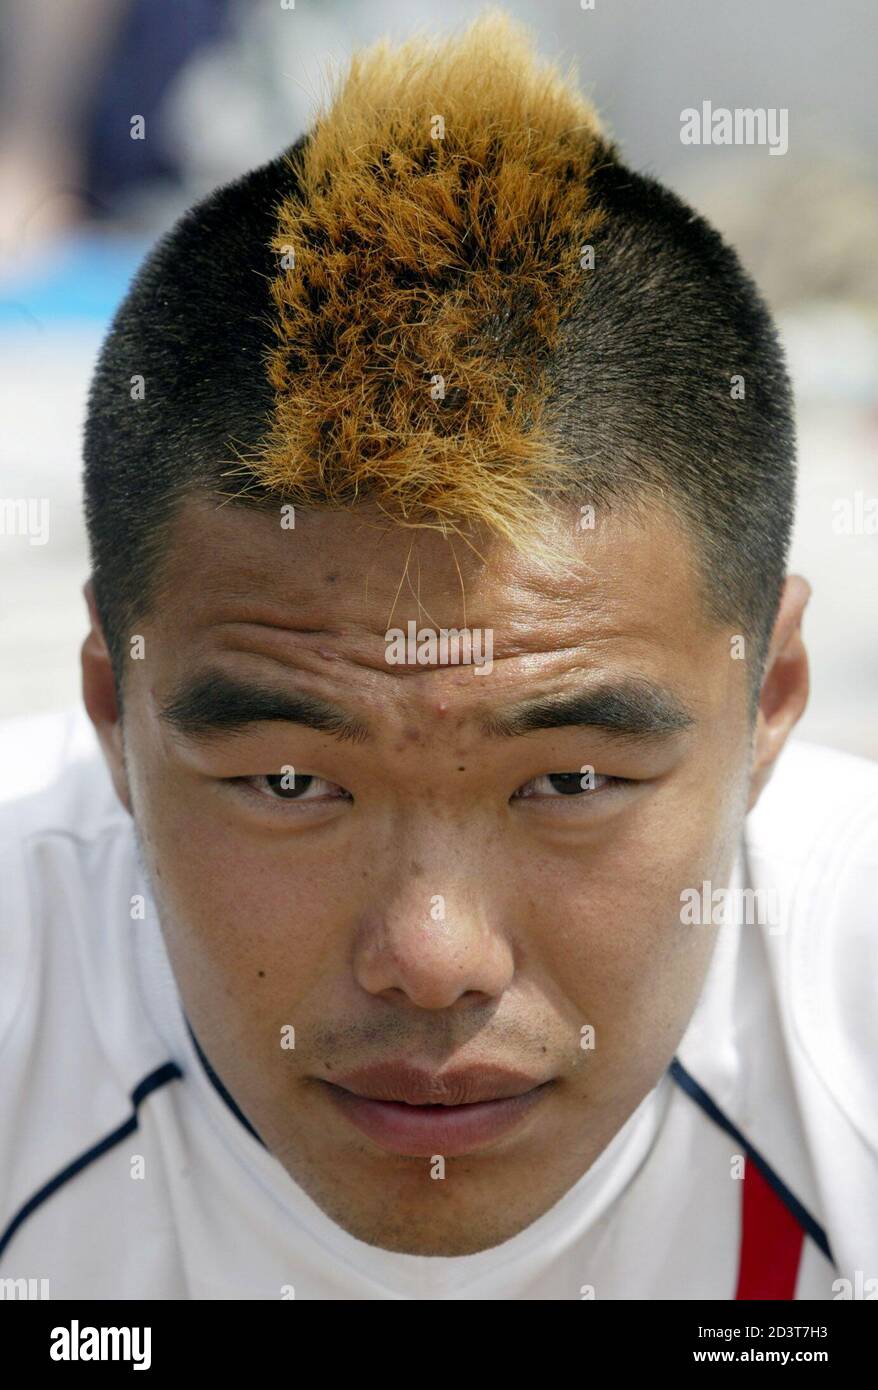 A soccer fan with a hair style similar to one worn by England's David  Beckham waits in front of World Cup Stadium in Taegu June 9, 2002, having  arrived two days before